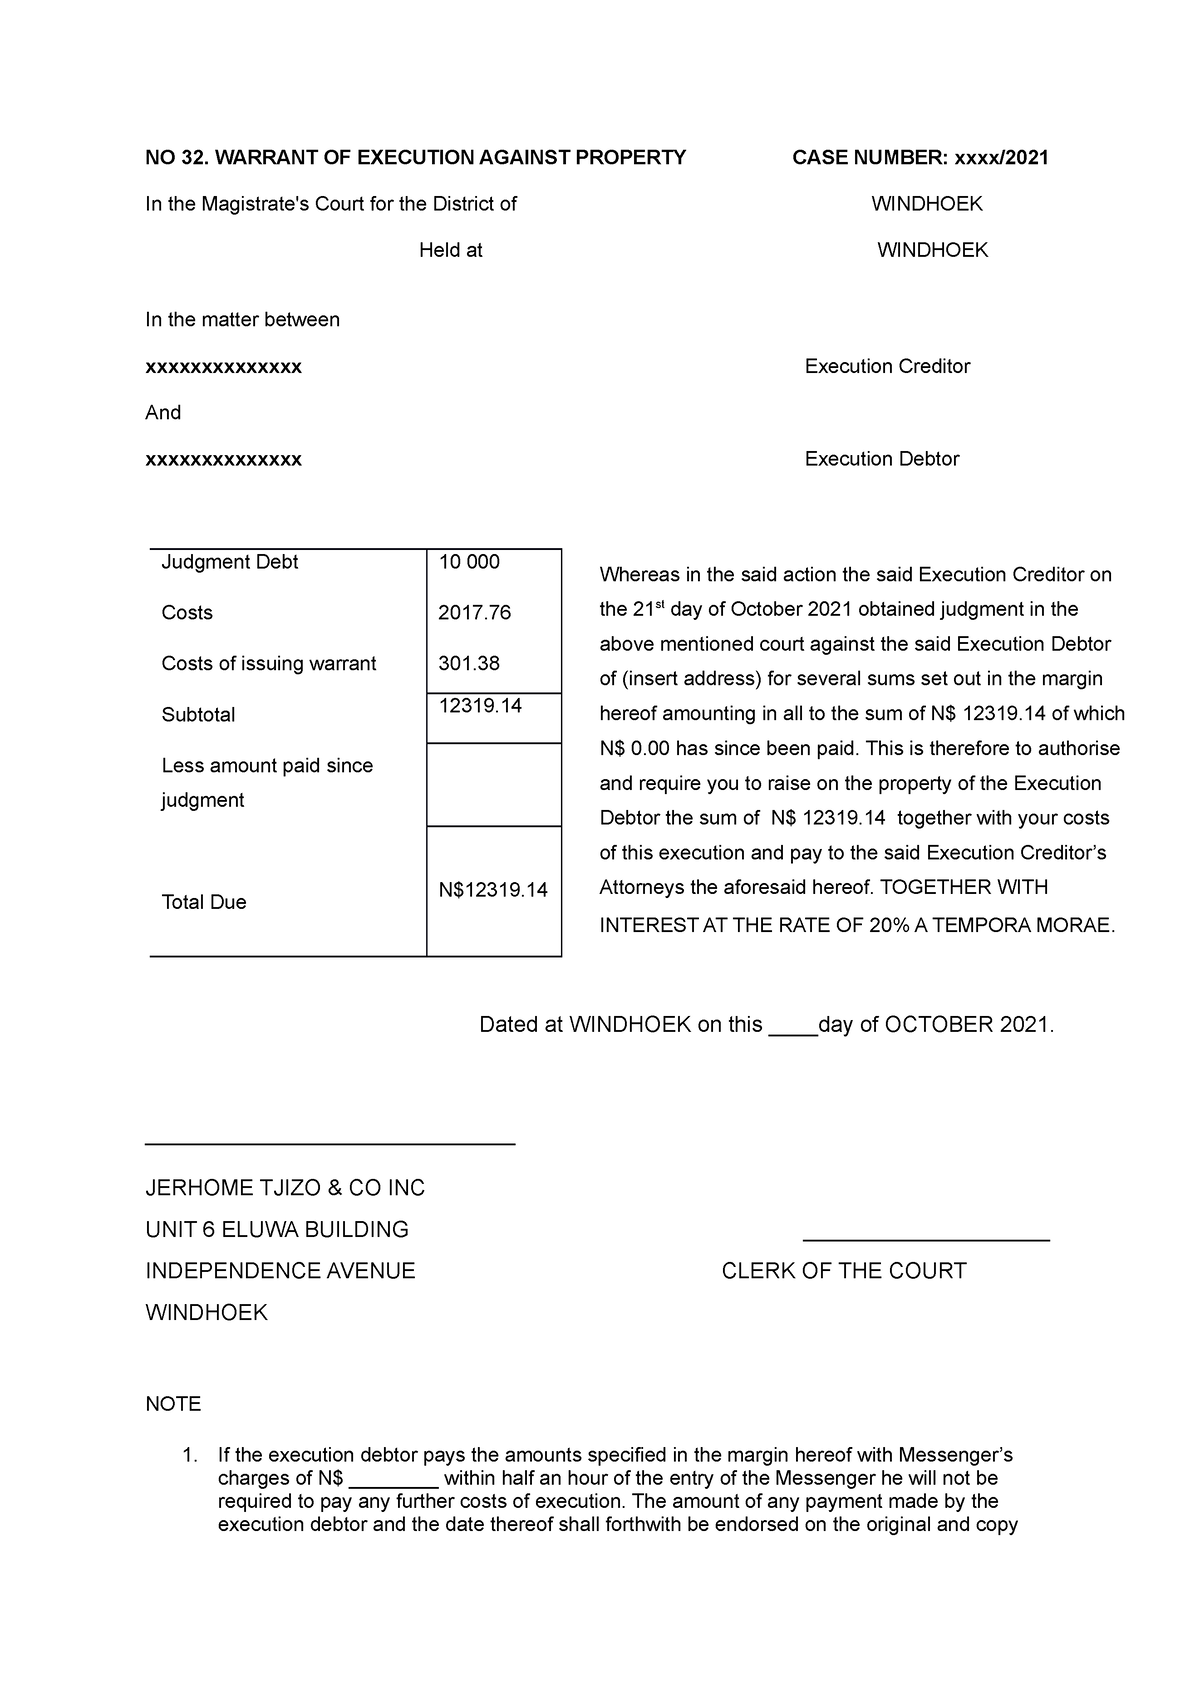 Warrant OF Execution example magistrates court NO 32 WARRANT OF